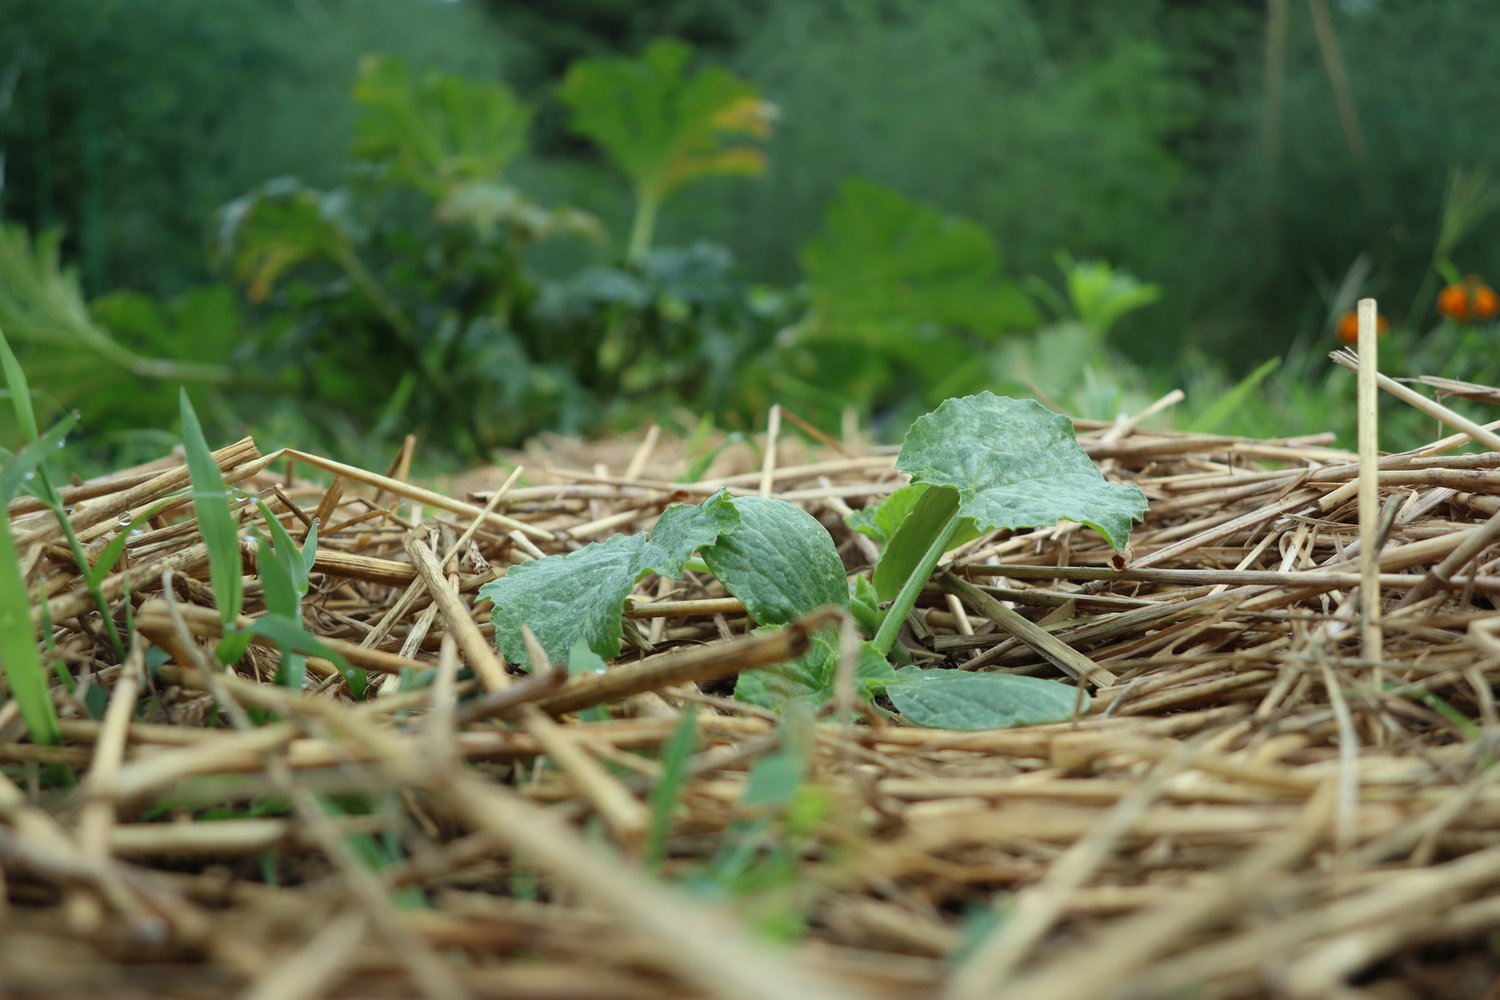 A replanted young zucchini frames the mature and stressed plant in the background.